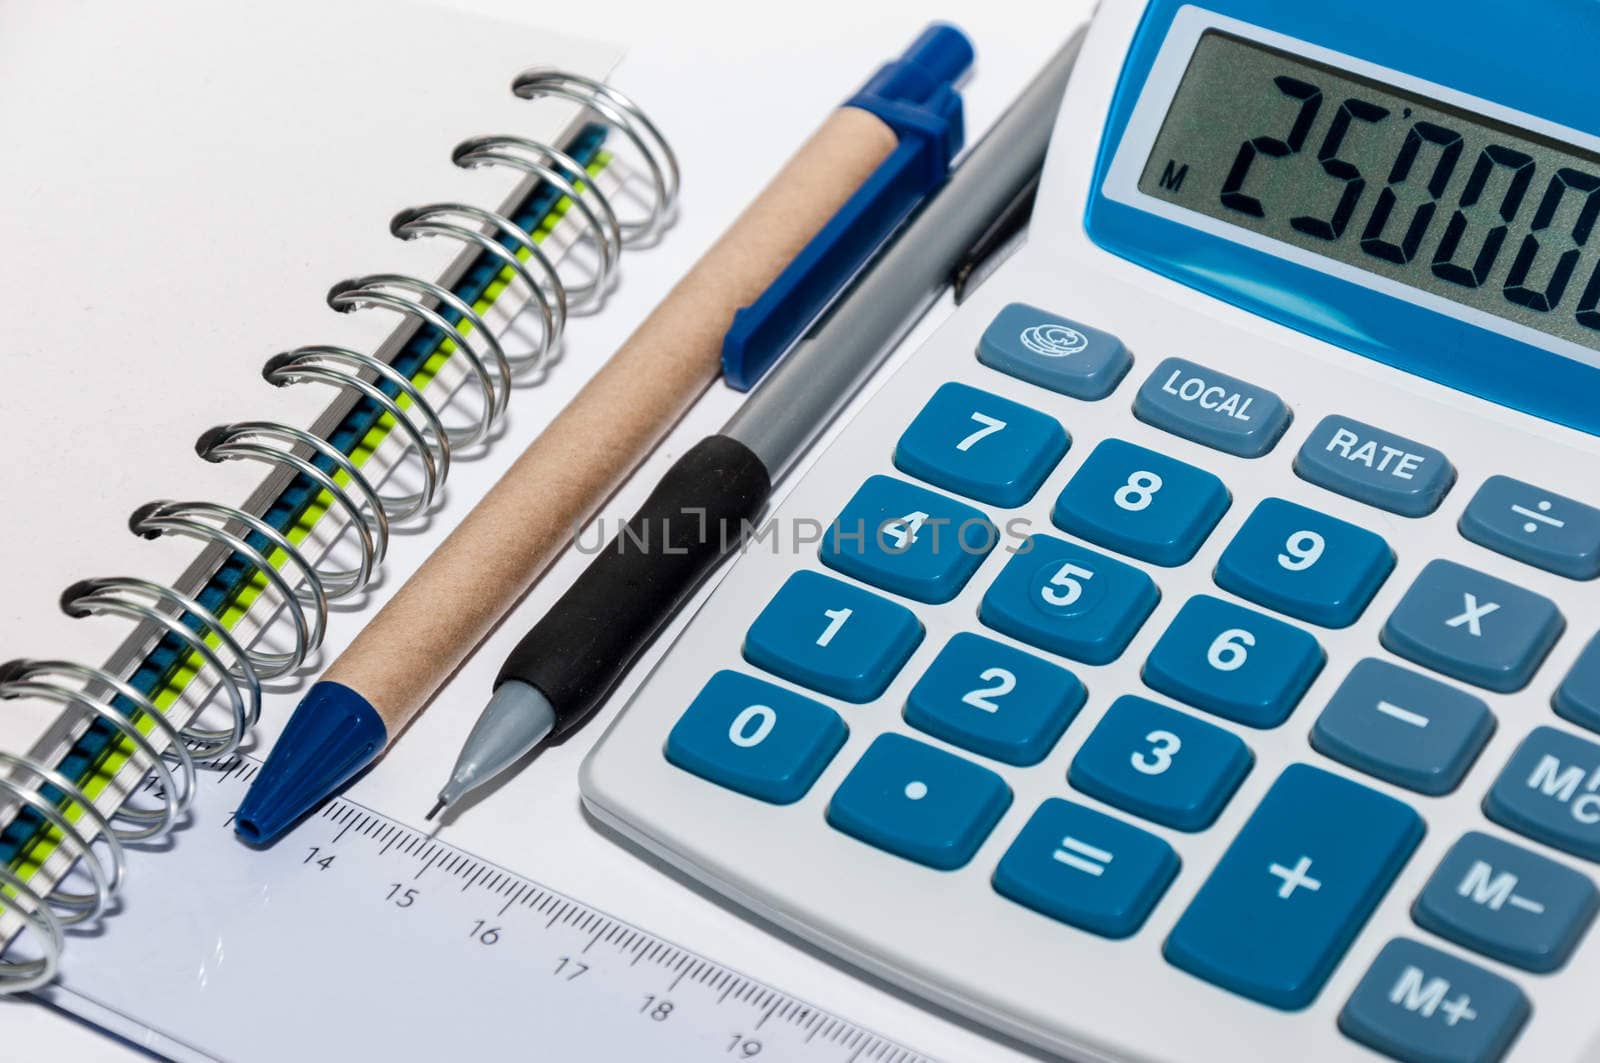 Notebook, pen and calculator on a white background